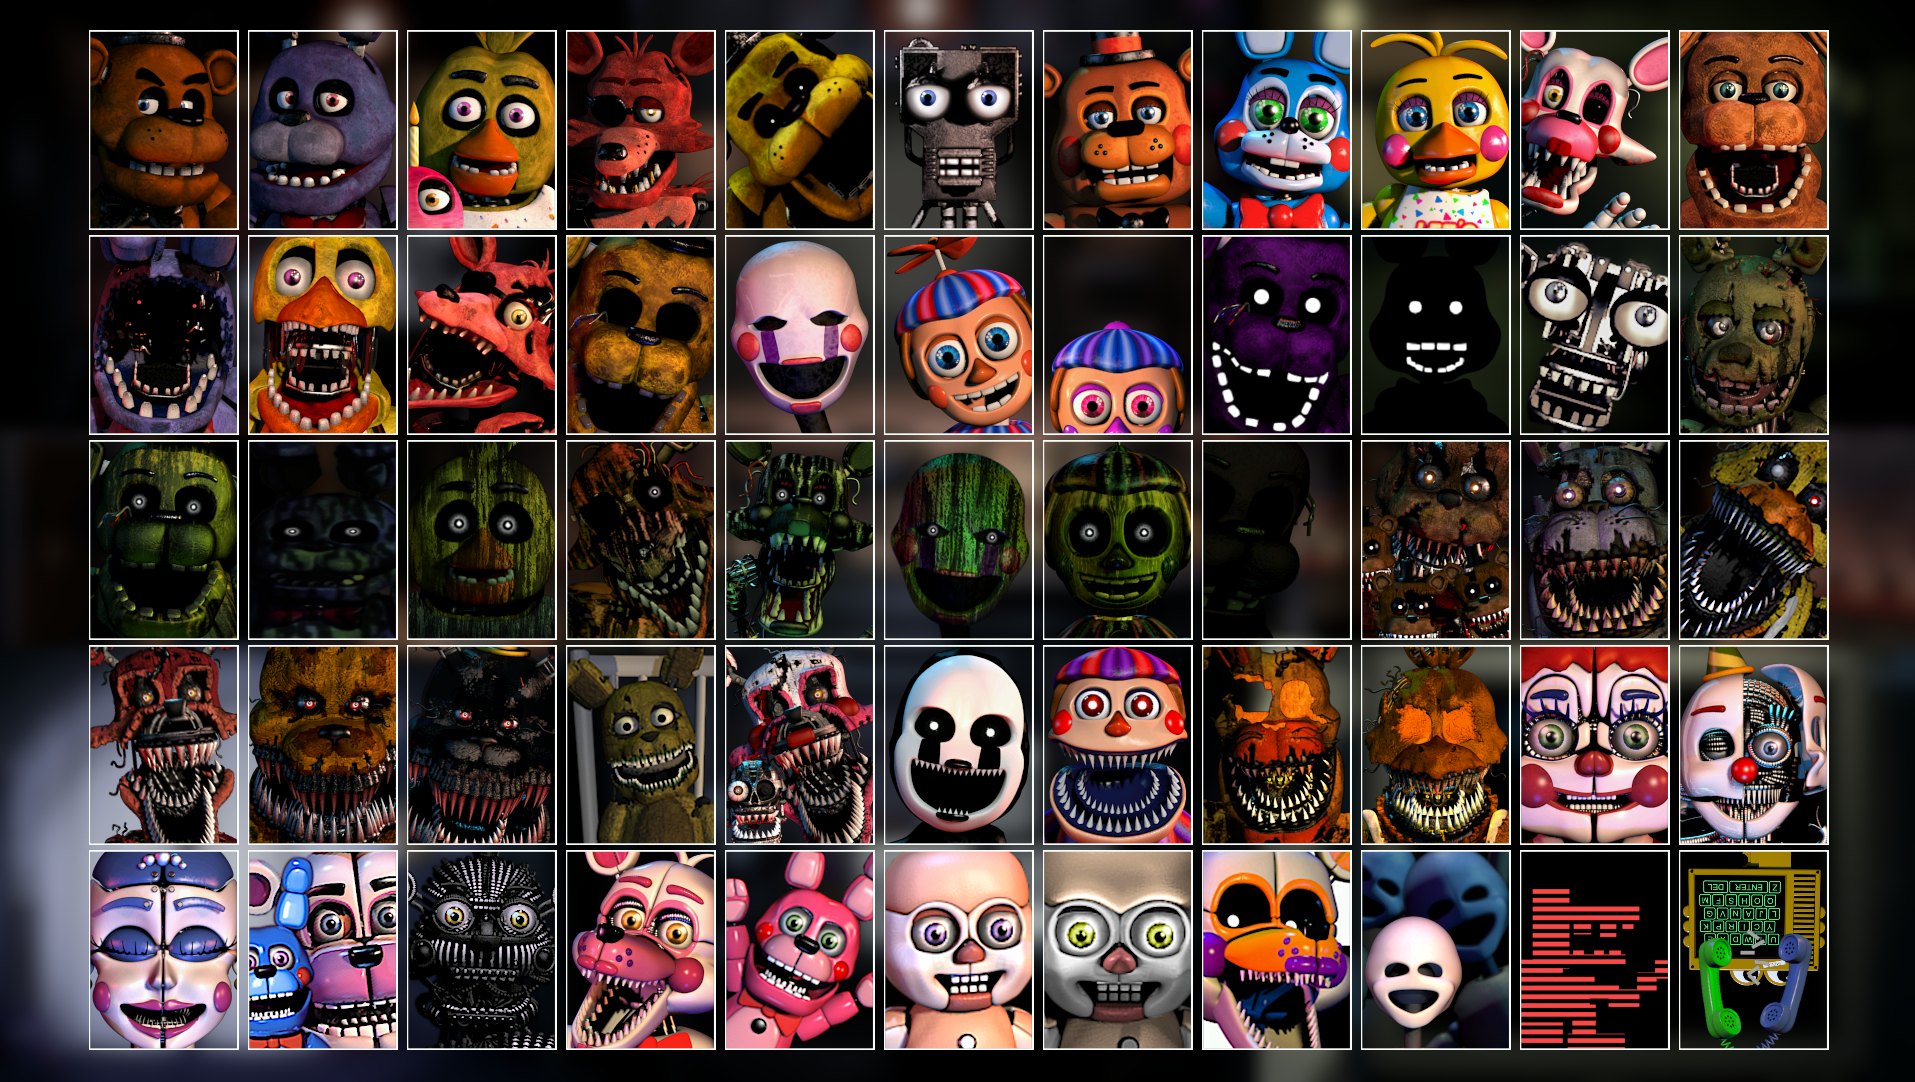 My Ideal FFPS Custom Night Roster (Justifications in the